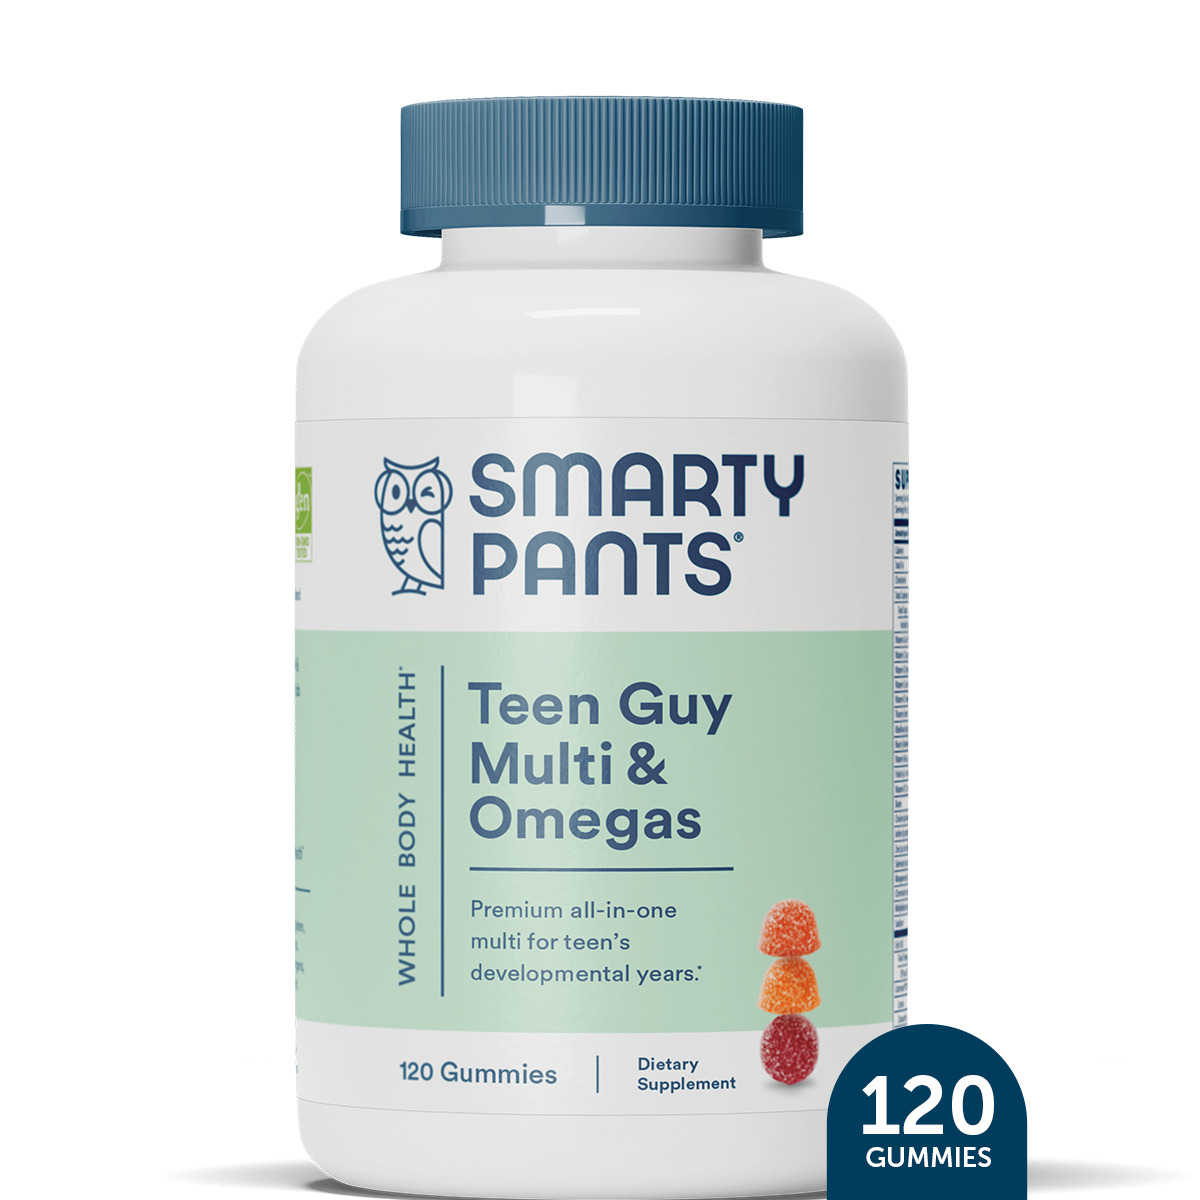 SmartyPants Teen Guy Multi & Omega 3 Fish Oil Gummy Vitamins with D3, C & B12 - 120 ct - image 1 of 12